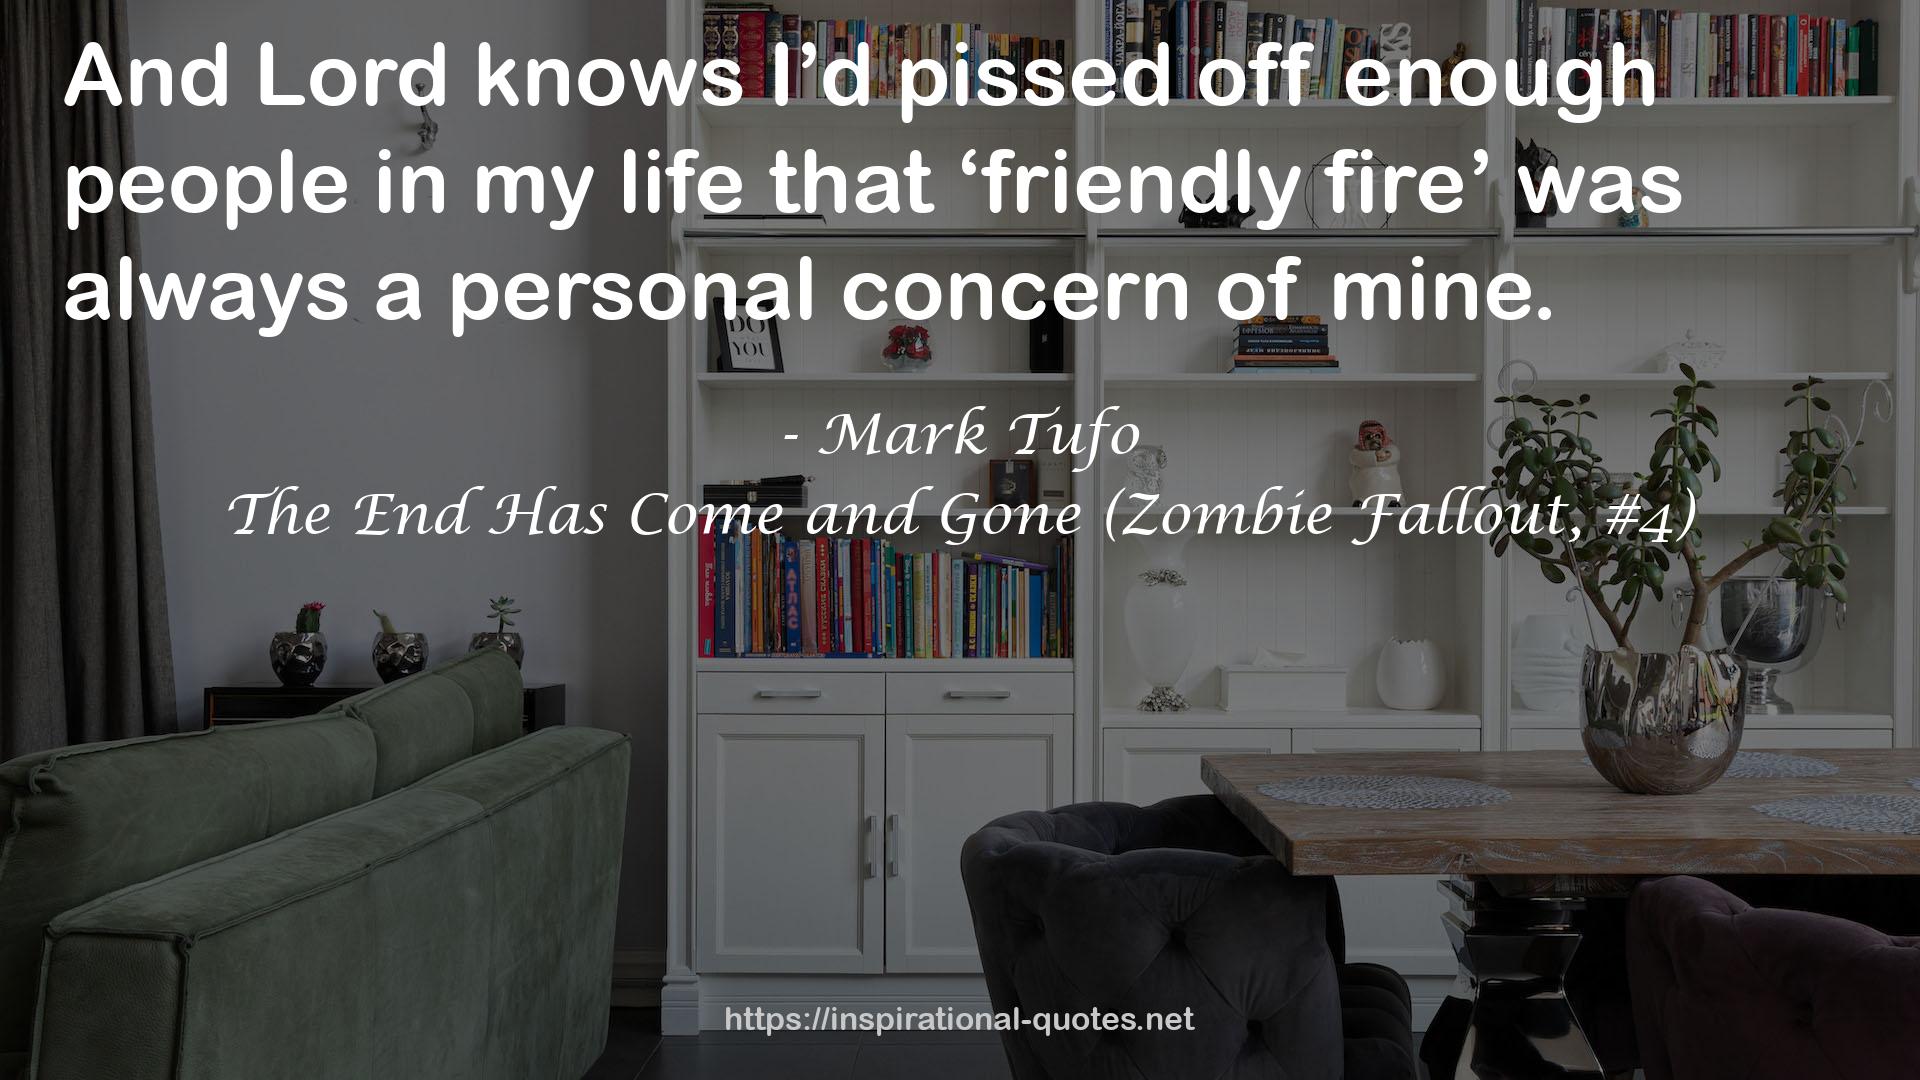 The End Has Come and Gone (Zombie Fallout, #4) QUOTES